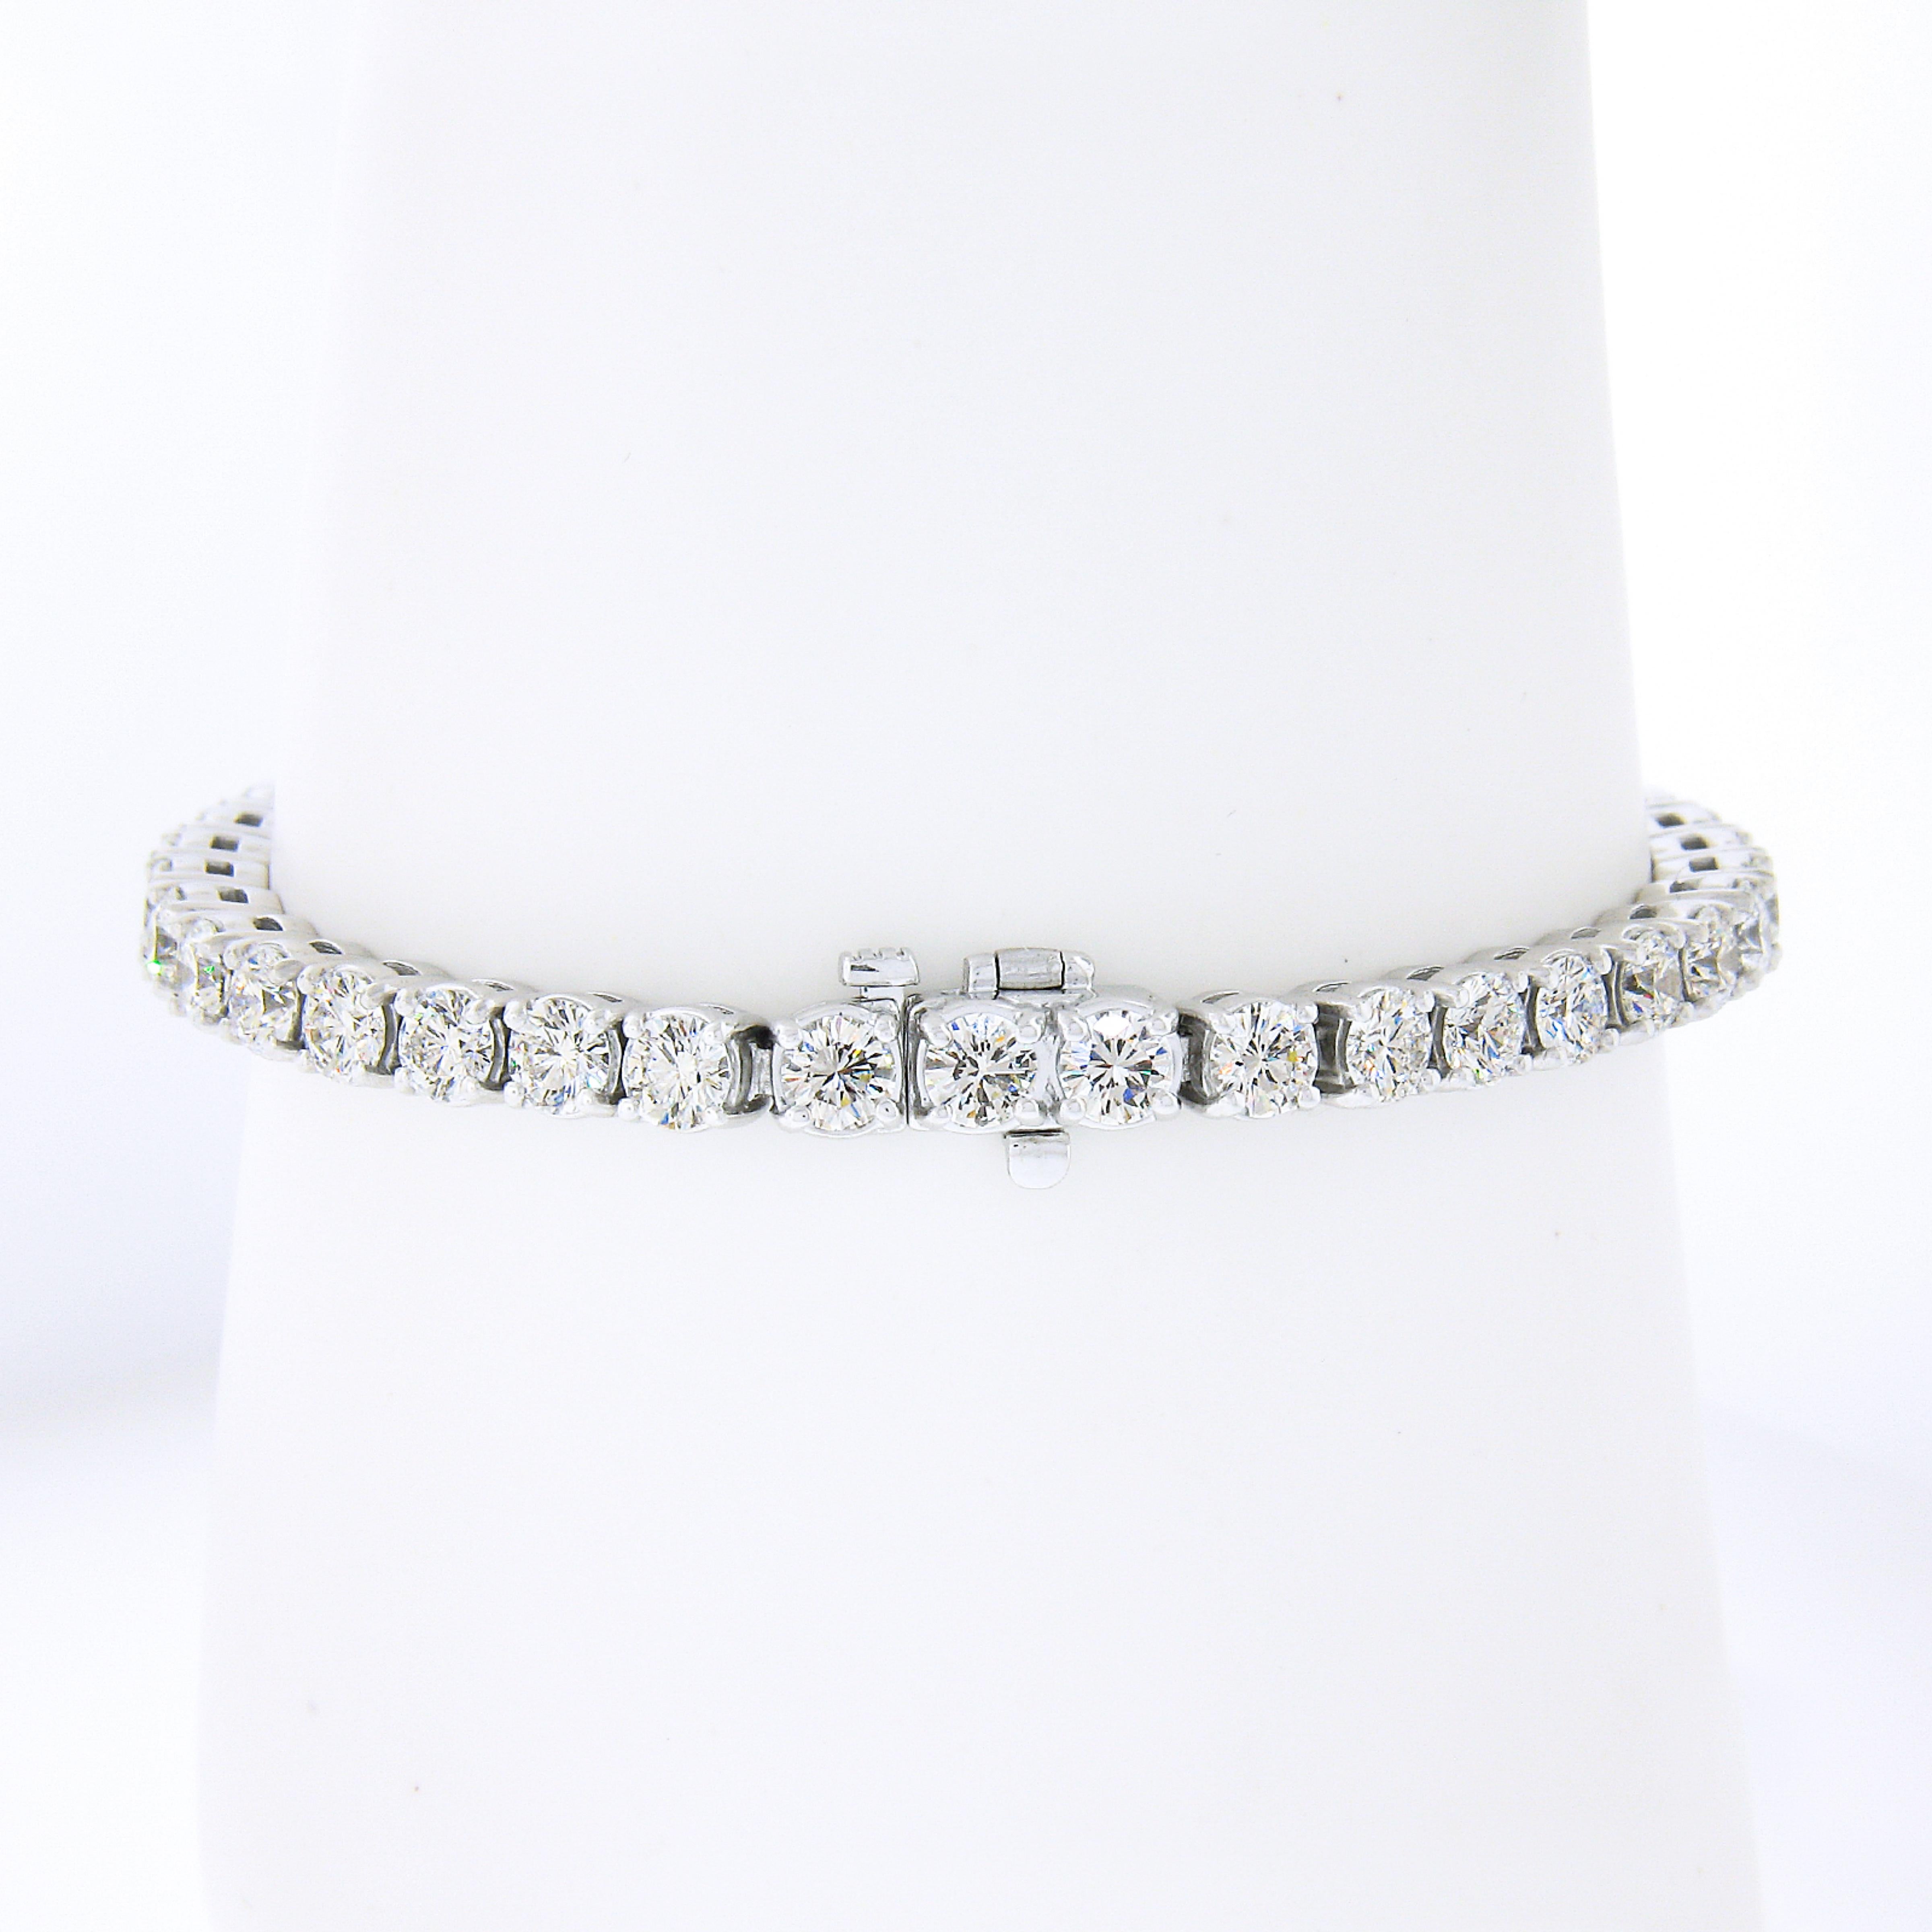 This absolutely jaw dropping and very well made diamond statement tennis bracelet is designed by Badis Jewelers and newly crafted in solid .950 platinum. It is set with 39, TOP QUALITY, and large round brilliant cut diamonds that are mounted in